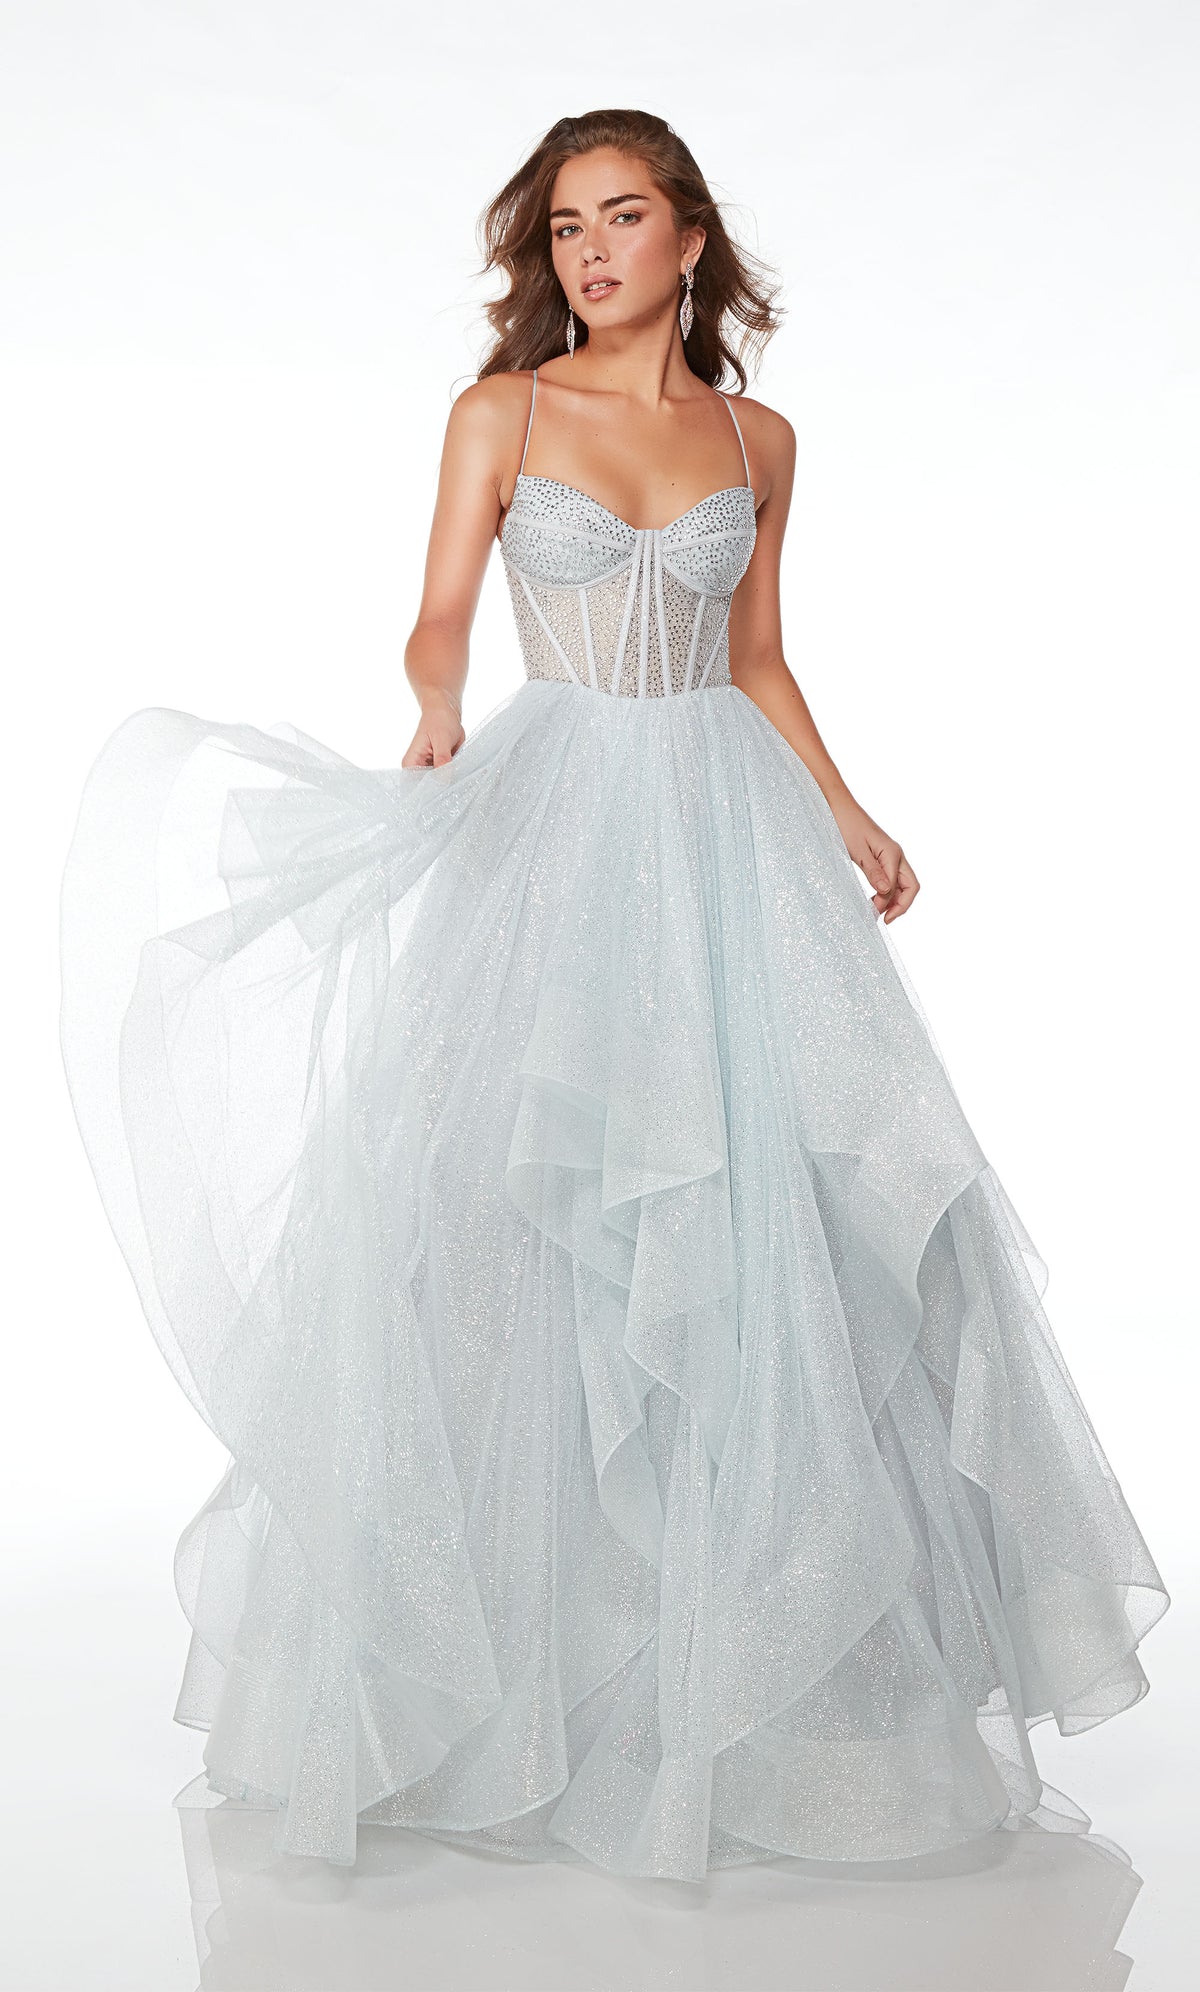 Dreamy silvery-blue glitter tulle ball gown: hotfix embellished corset bodice, ruffled skirt, lace-up back for the perfect custom fit and elegant allure.